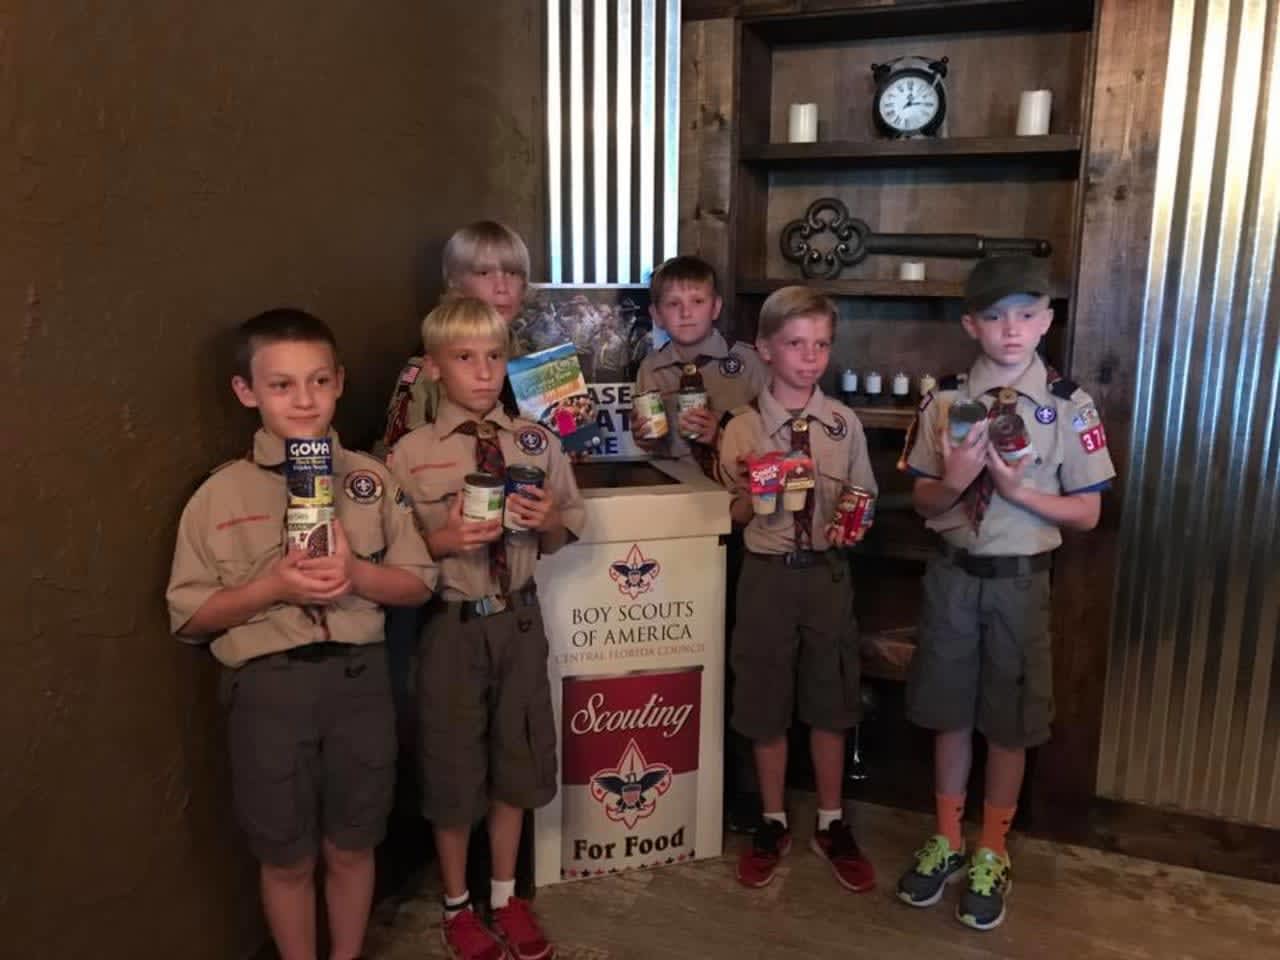 In addition to the joy of helping others, Scouting for Food gives young people a sense of responsibility and teaches leadership.